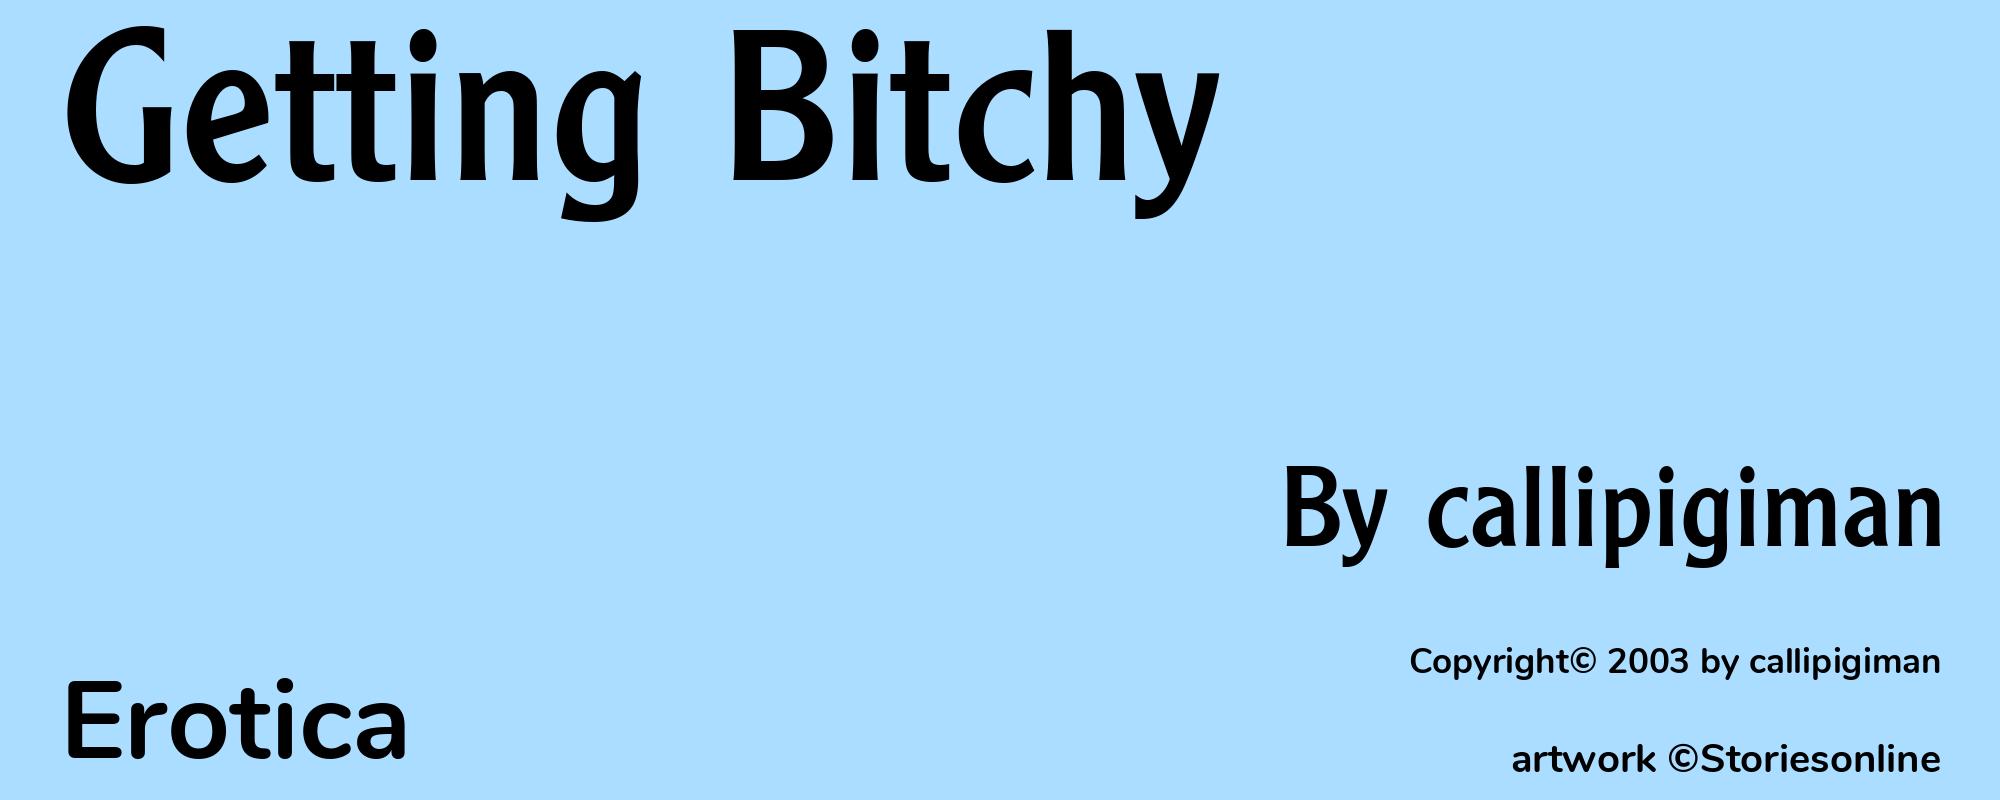 Getting Bitchy - Cover